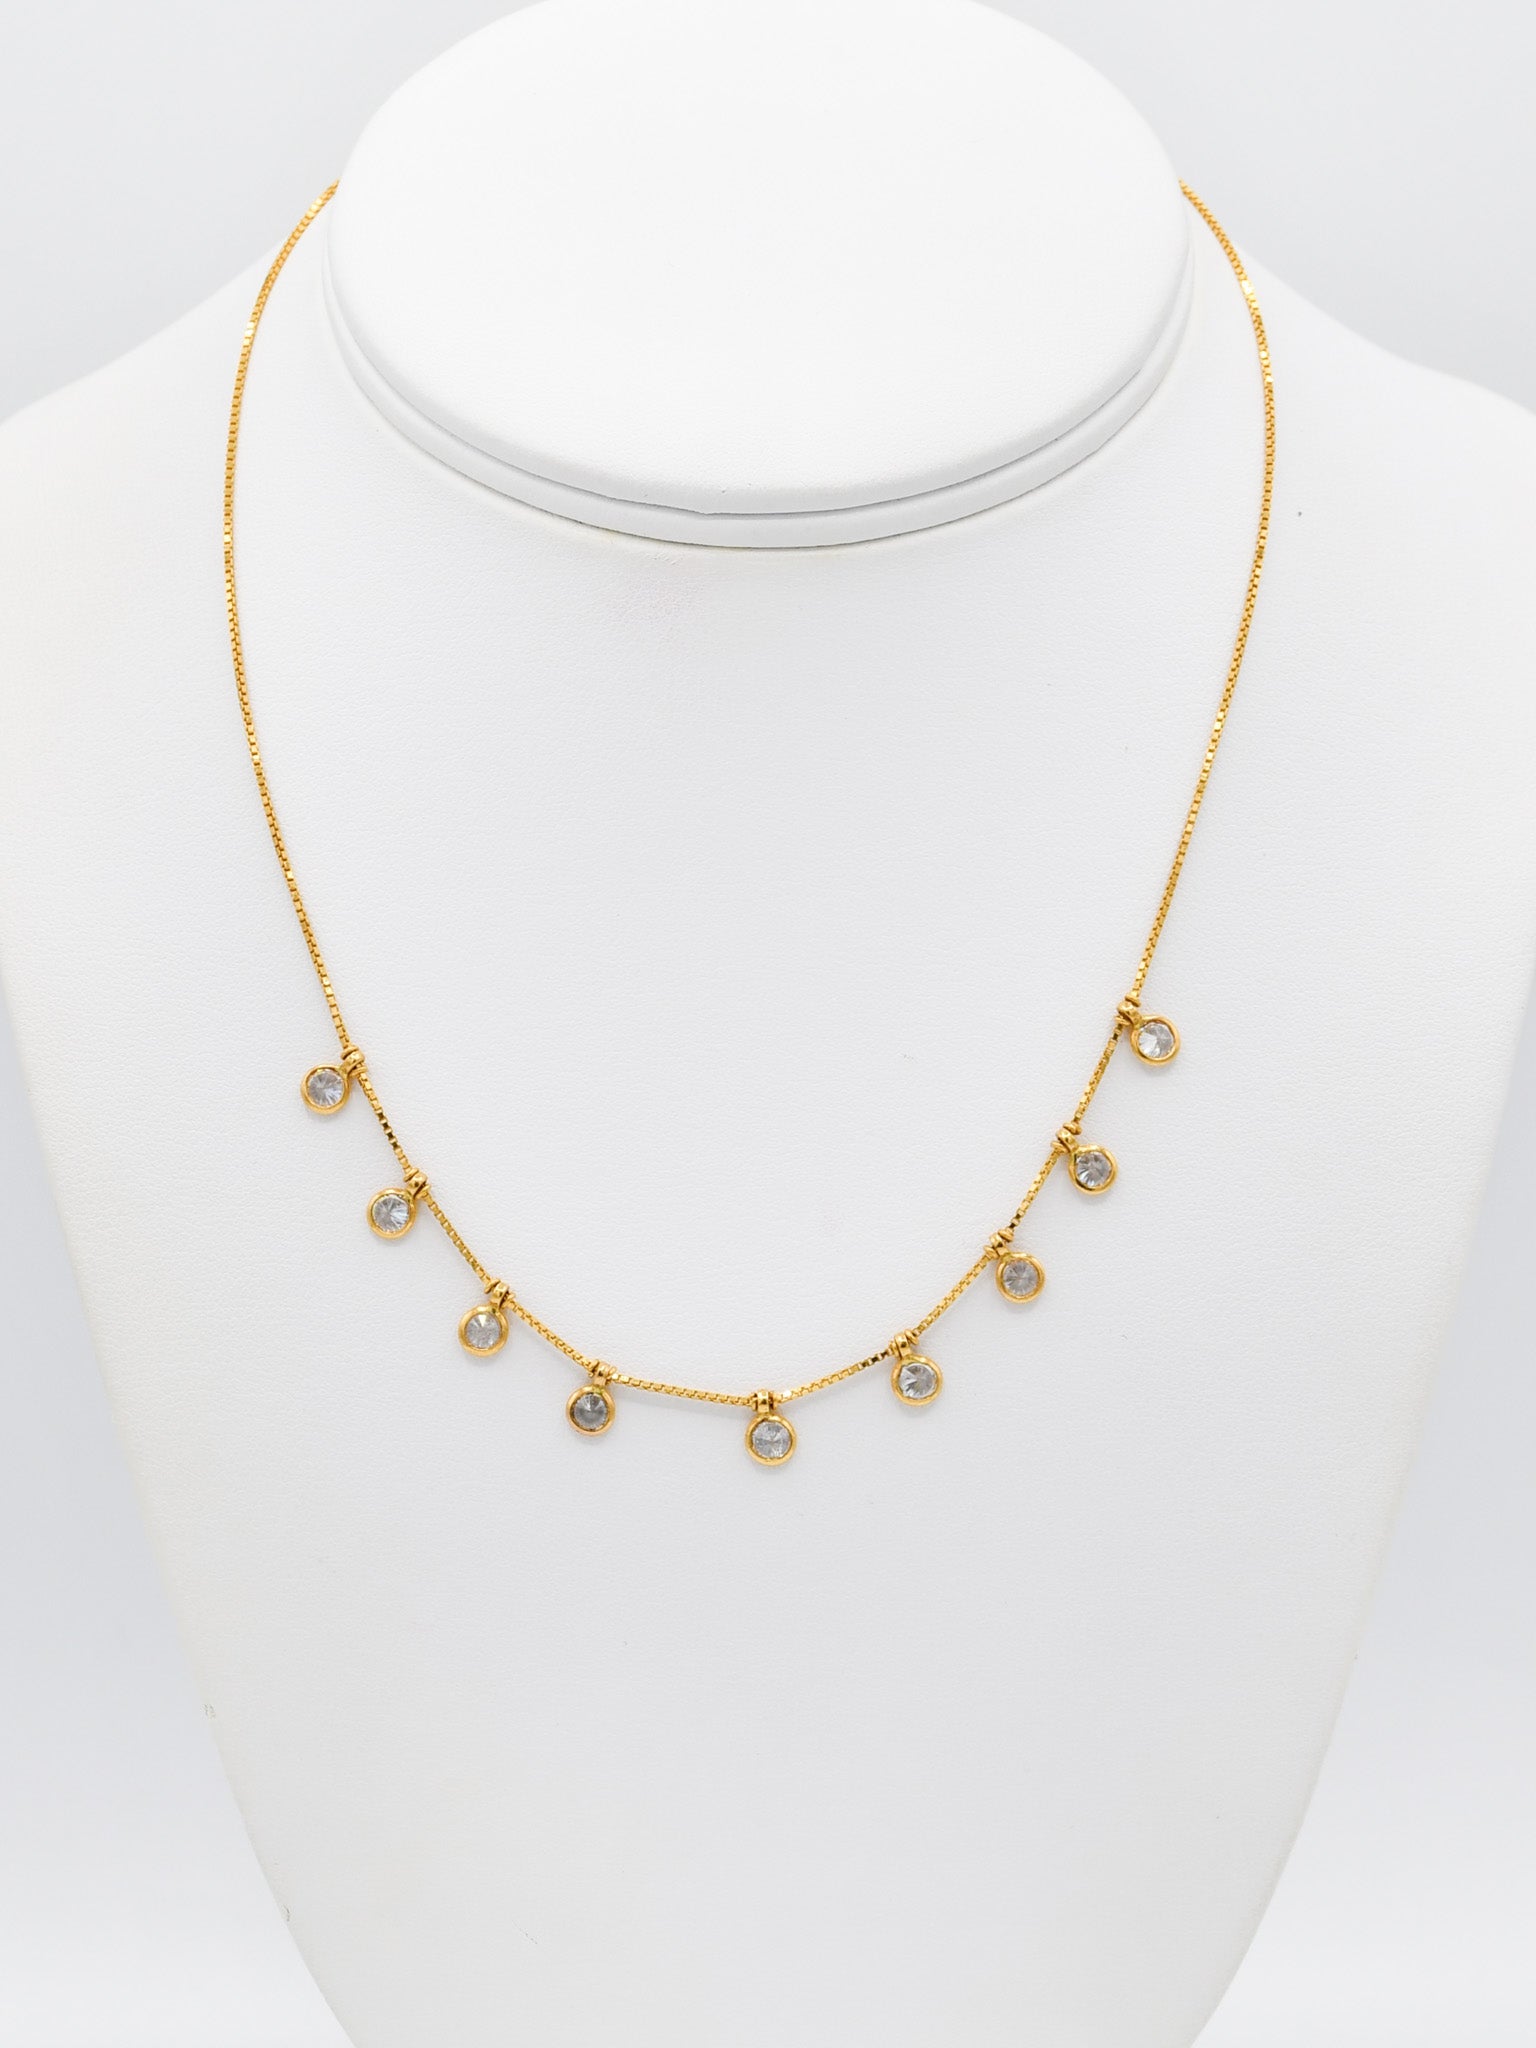 22ct Gold CZ Necklace Set - Roop Darshan